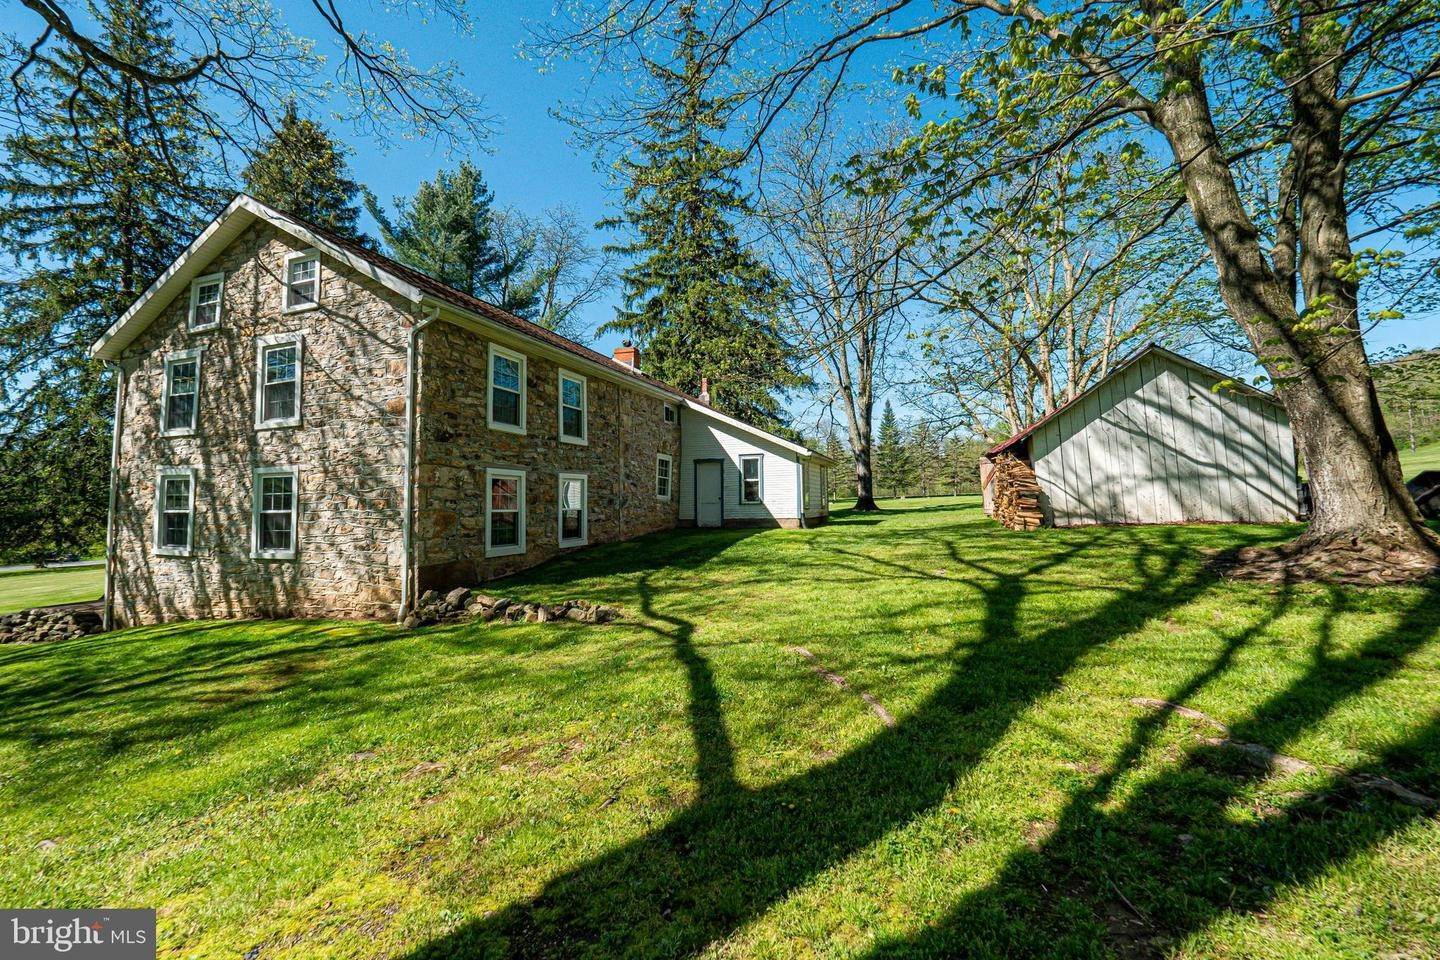 4. Farm for Sale at 15571 ROUTE 35 S Mifflin, Pennsylvania 17058 United States